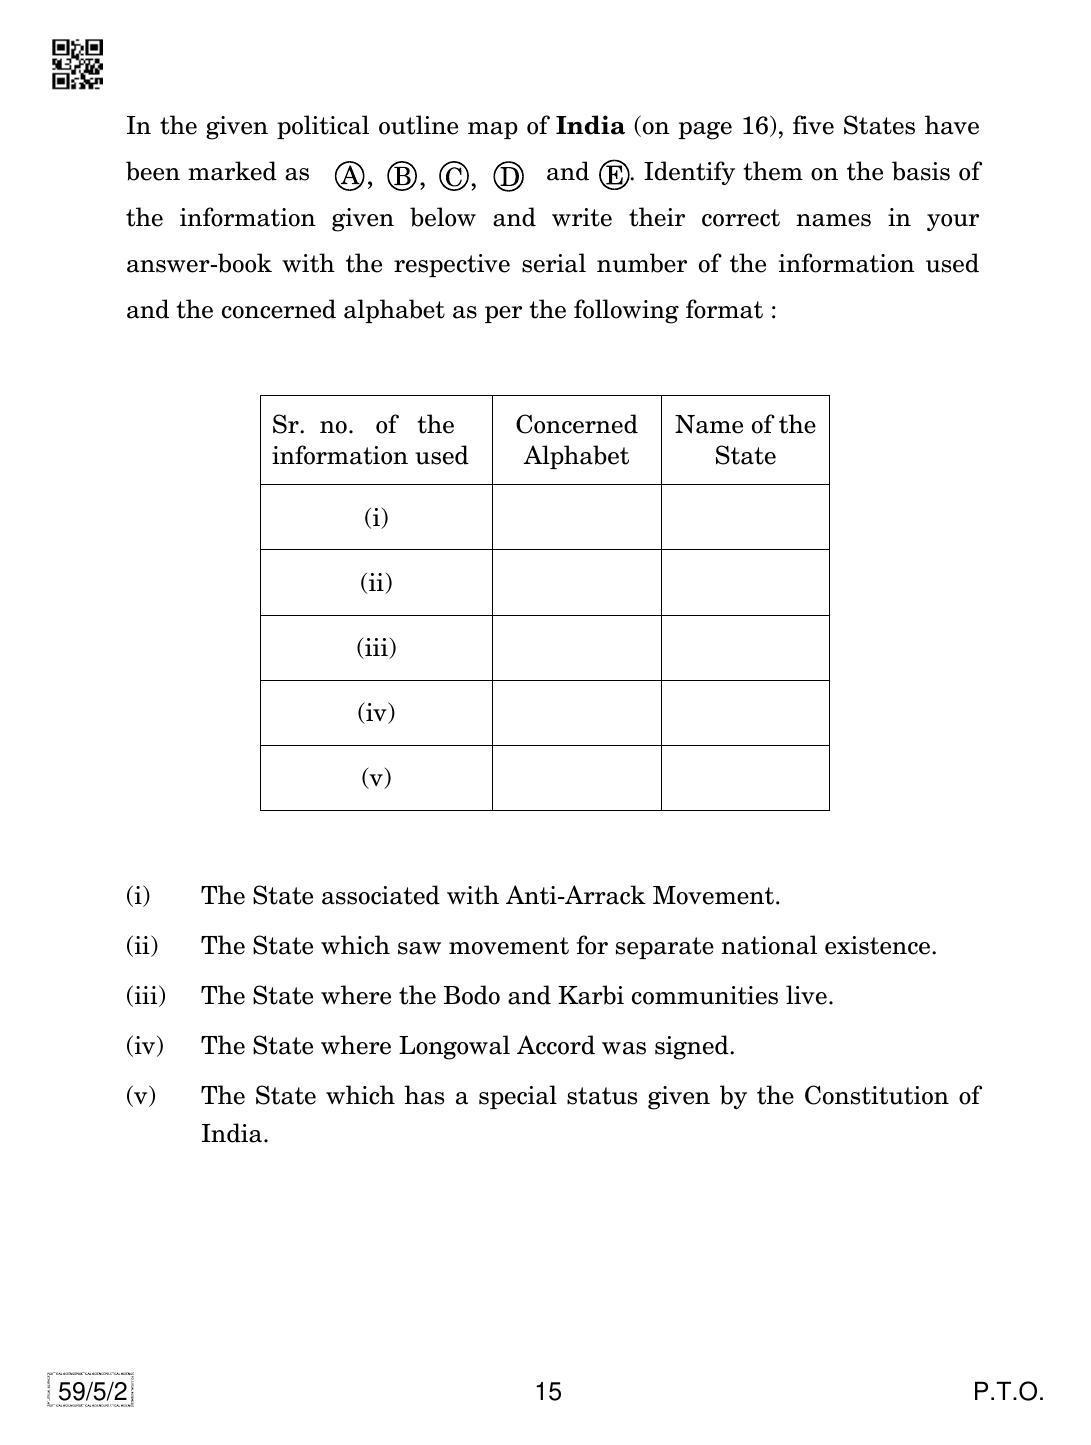 CBSE Class 12 59-5-2 Political Science 2019 Question Paper - Page 15